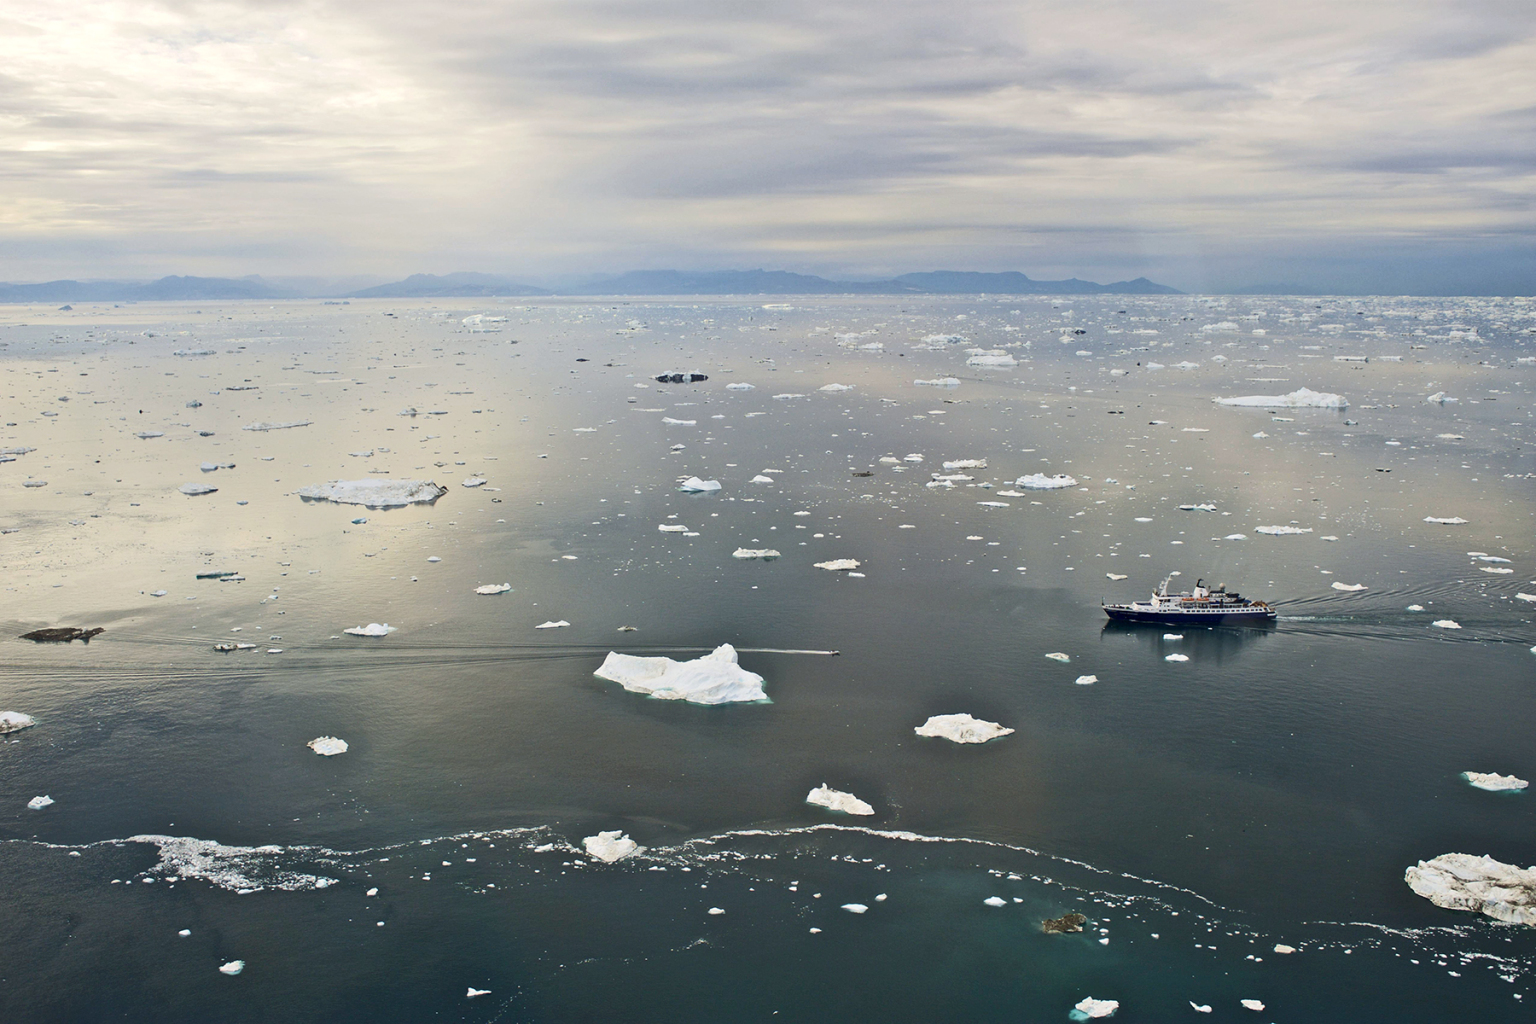 A cruise ship near the harbor of Ilulissat off the west coast of Greenland, north of the Arctic Circle, in August 2012. (Education Images/UIG via Getty Images)